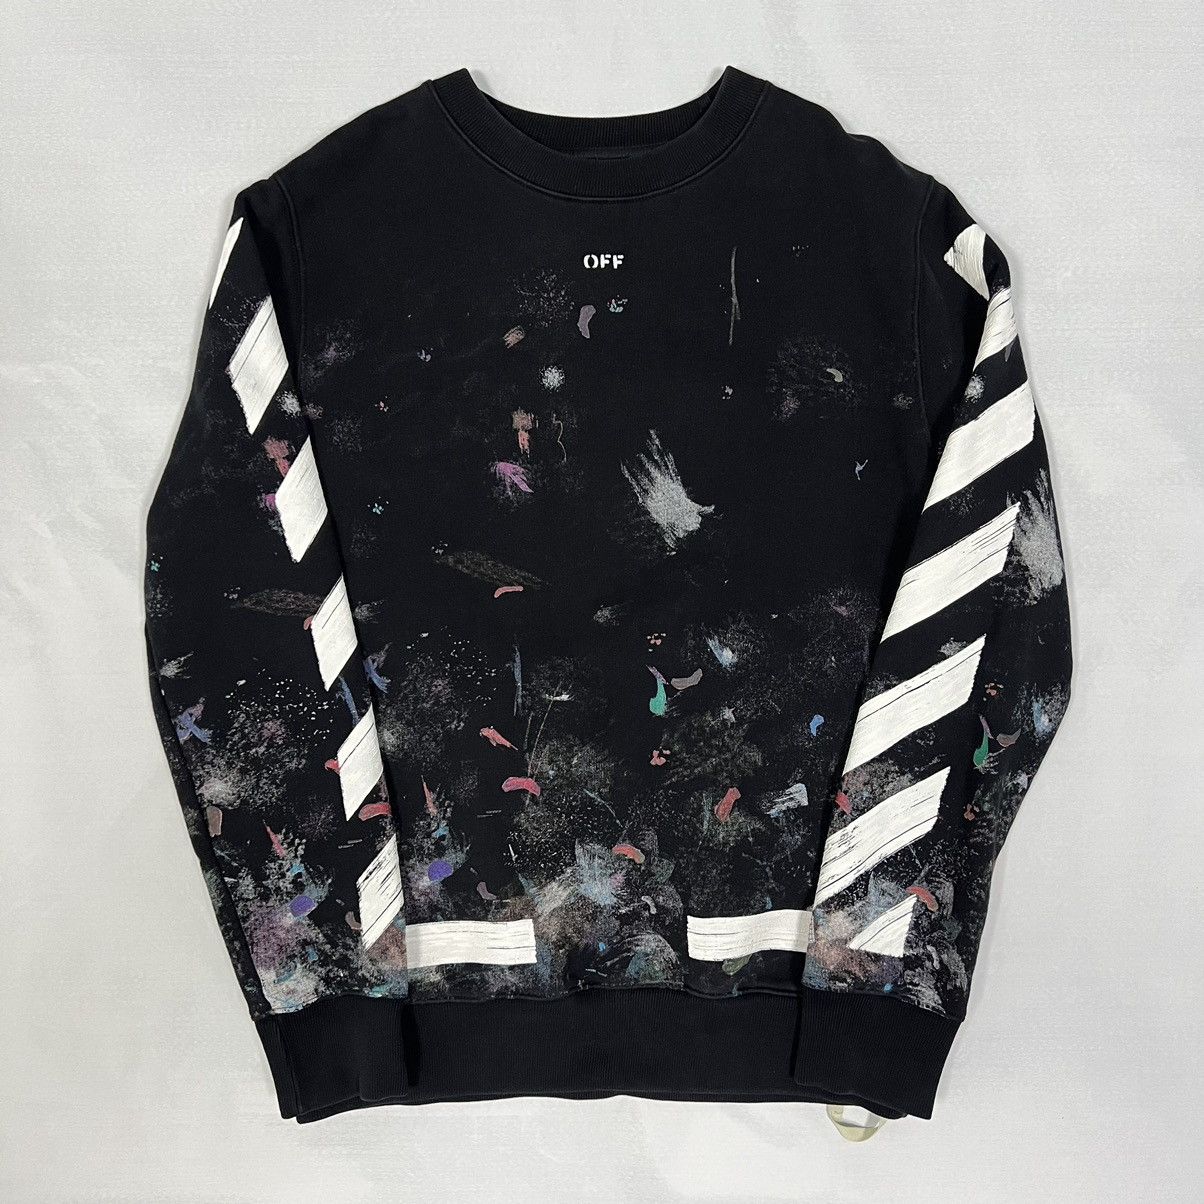 Off-White OFF-WHITE AW17 DIAG GALAXY BRUSHED CREWNECK SWEATSHIRT | Grailed